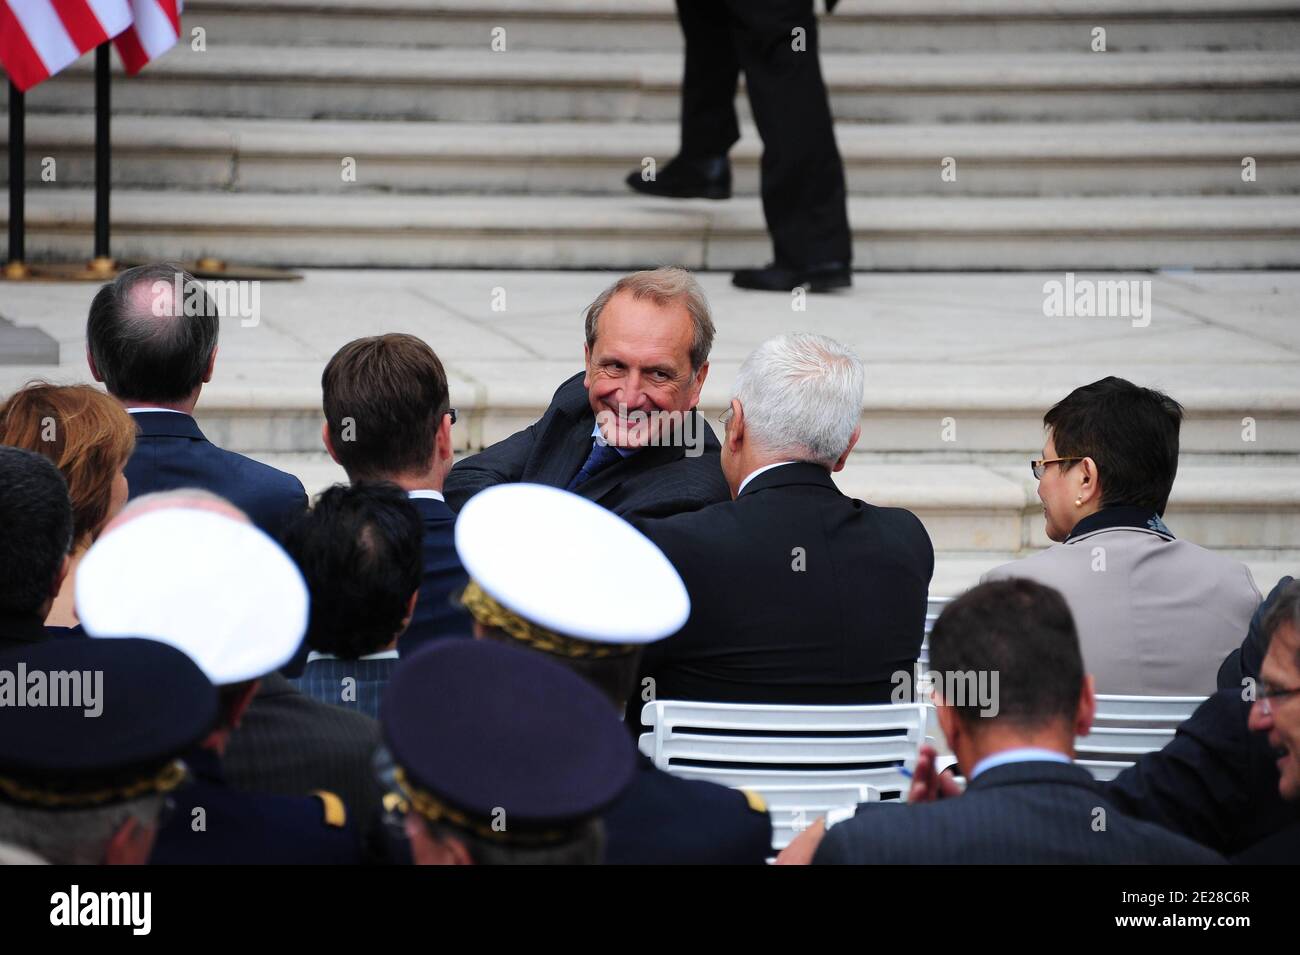 French Defence Minister Gerard Longuet is pictured during the celebration of 10th Anniversary of the September 11 at US Embassy in Paris, France on September 9, 2011. Photo by Mousse/ABACAPRESS.COM Stock Photo